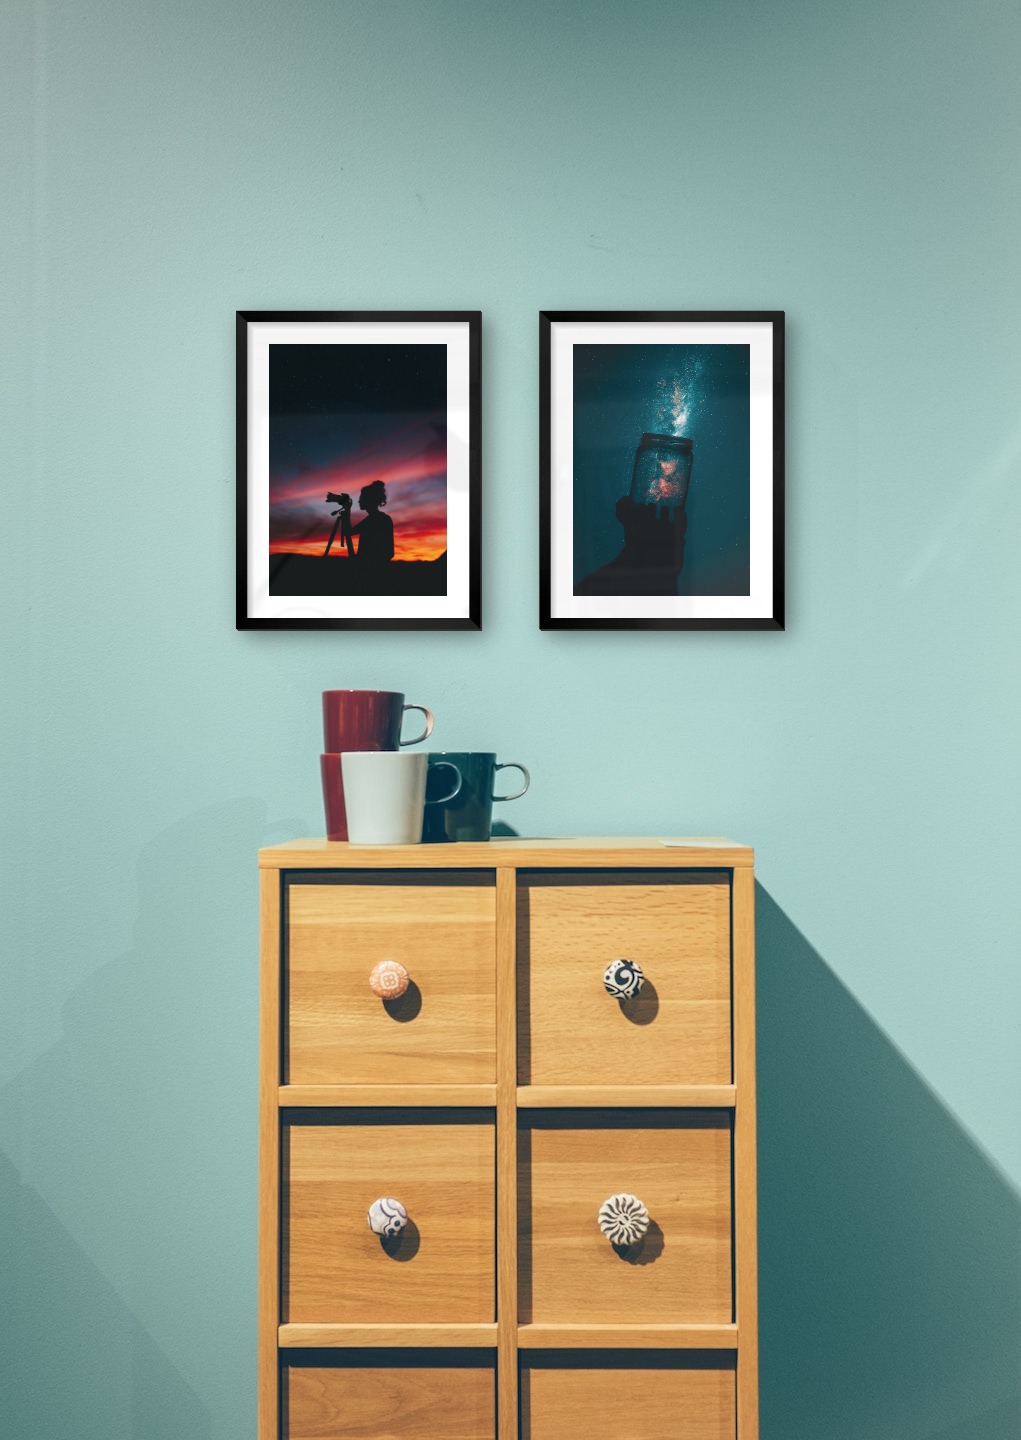 Gallery wall with picture frames in black in sizes 30x40 with prints "Photographer at night" and "Jar in front of space"